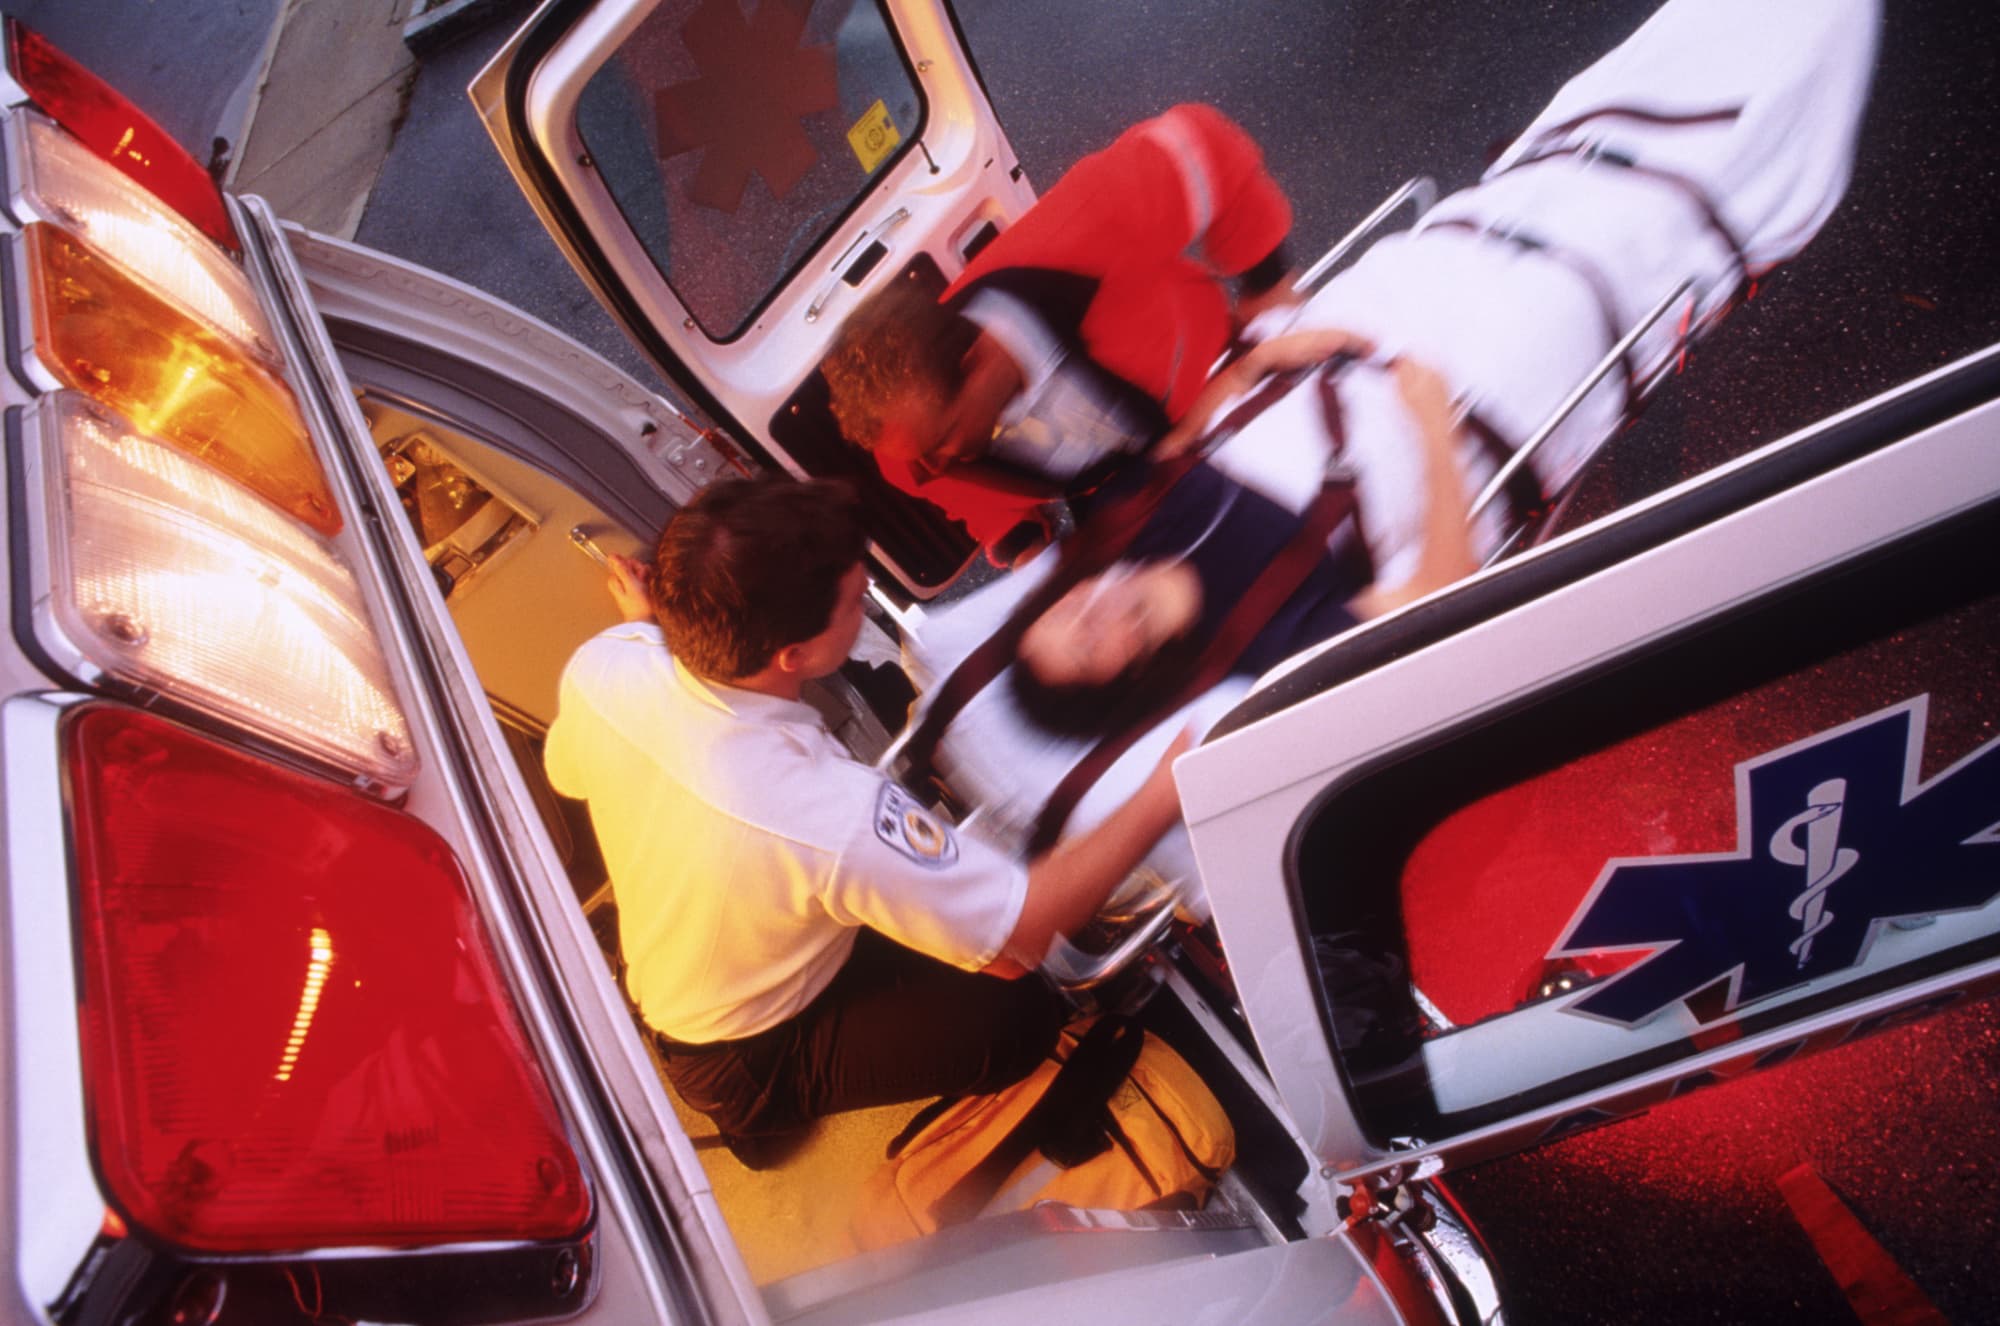 EMT vs. Paramedic: What’s the Difference?